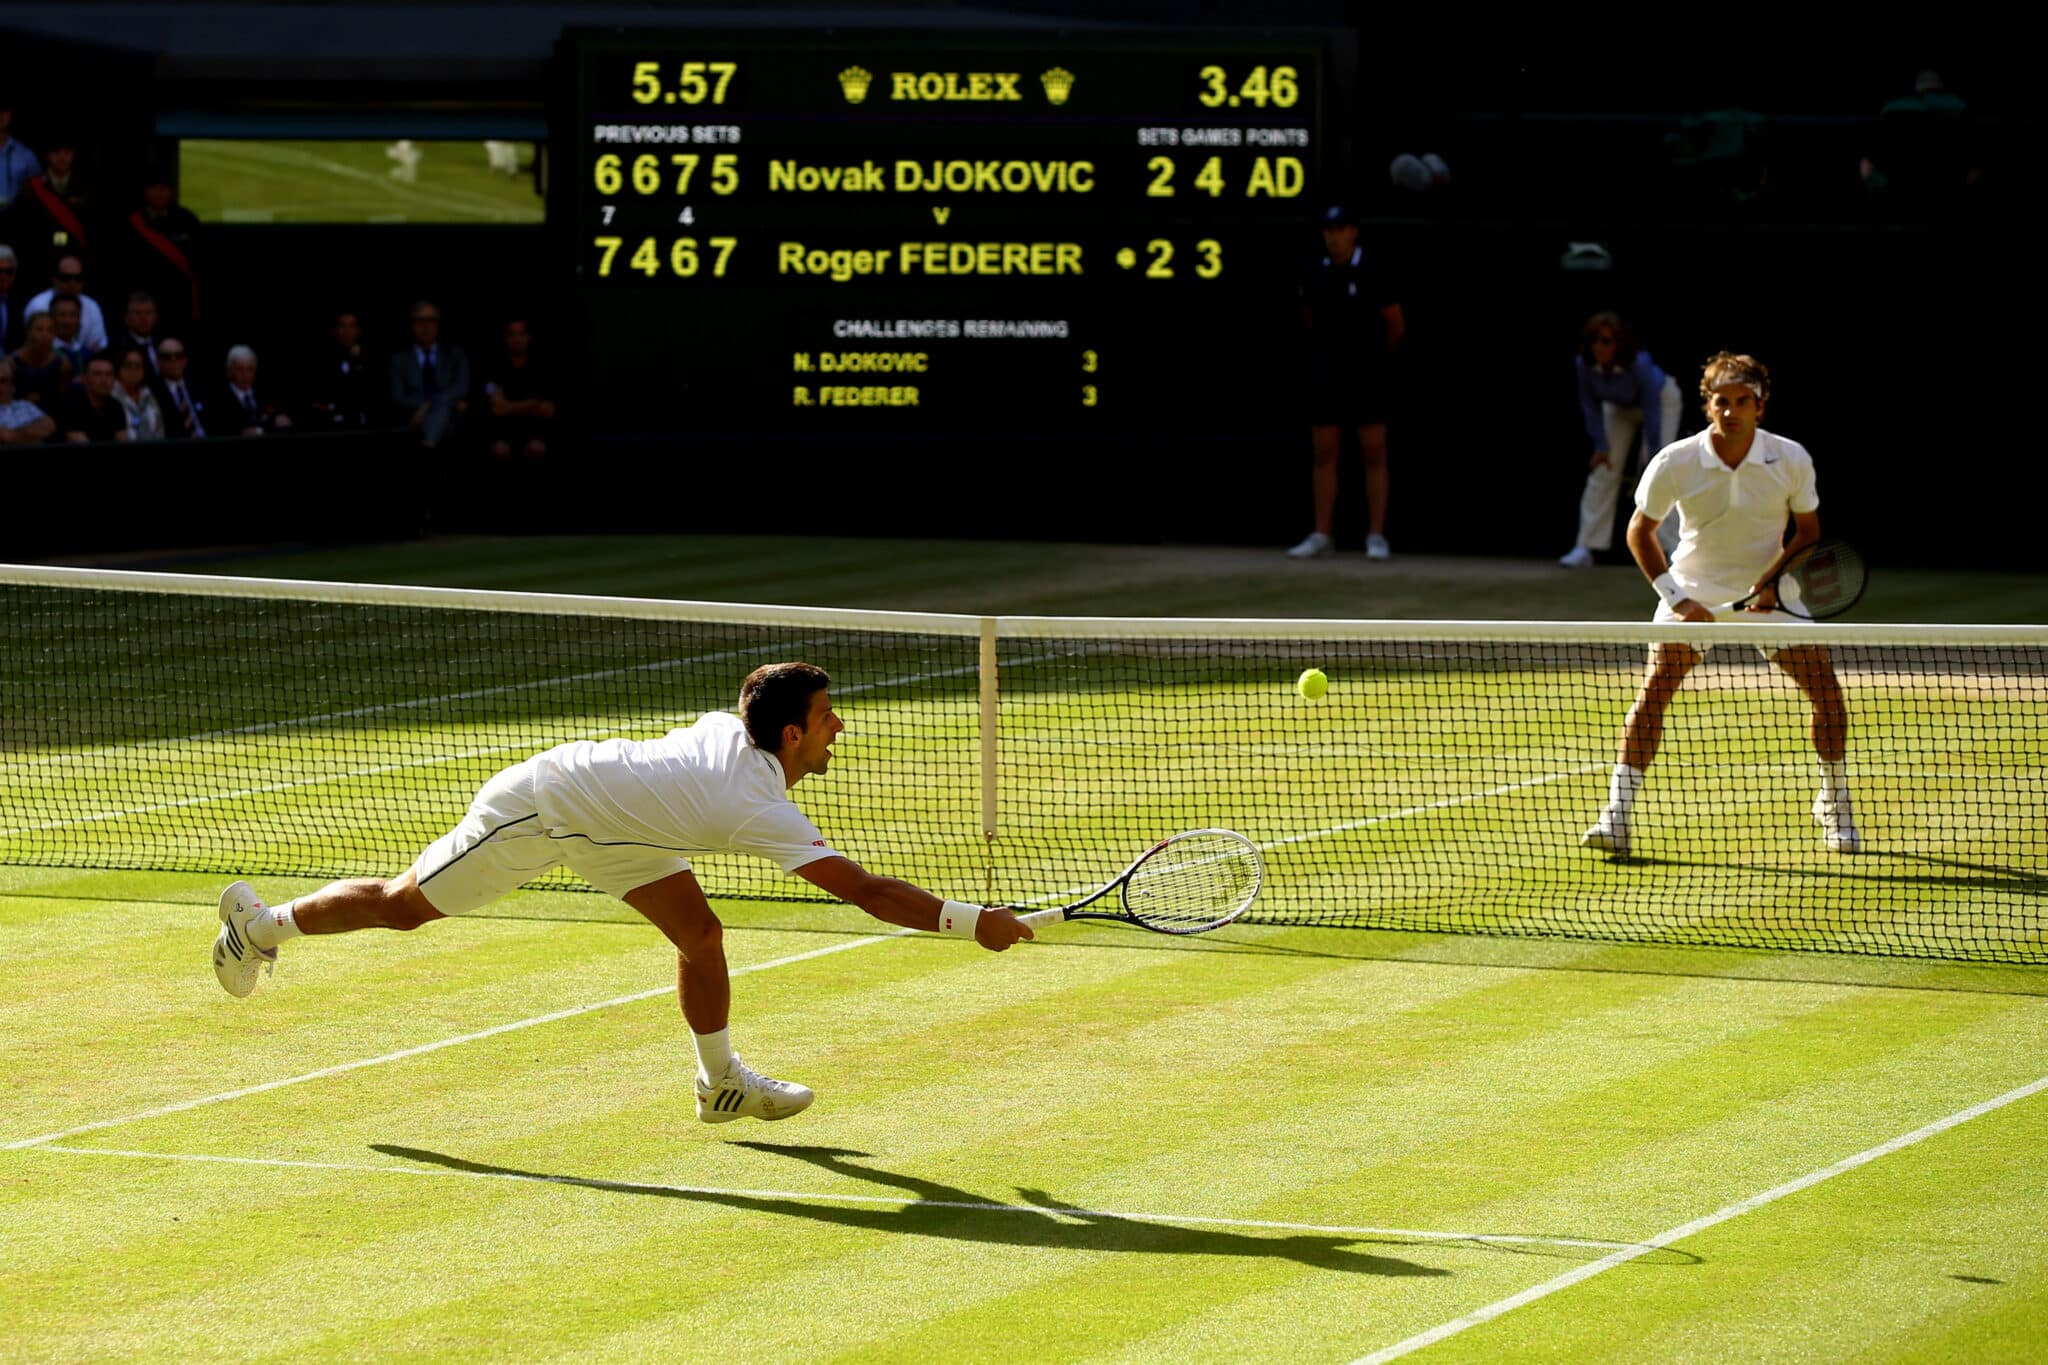 Djokovic and Federer battle it out in the 2019 Wimbledon Final!